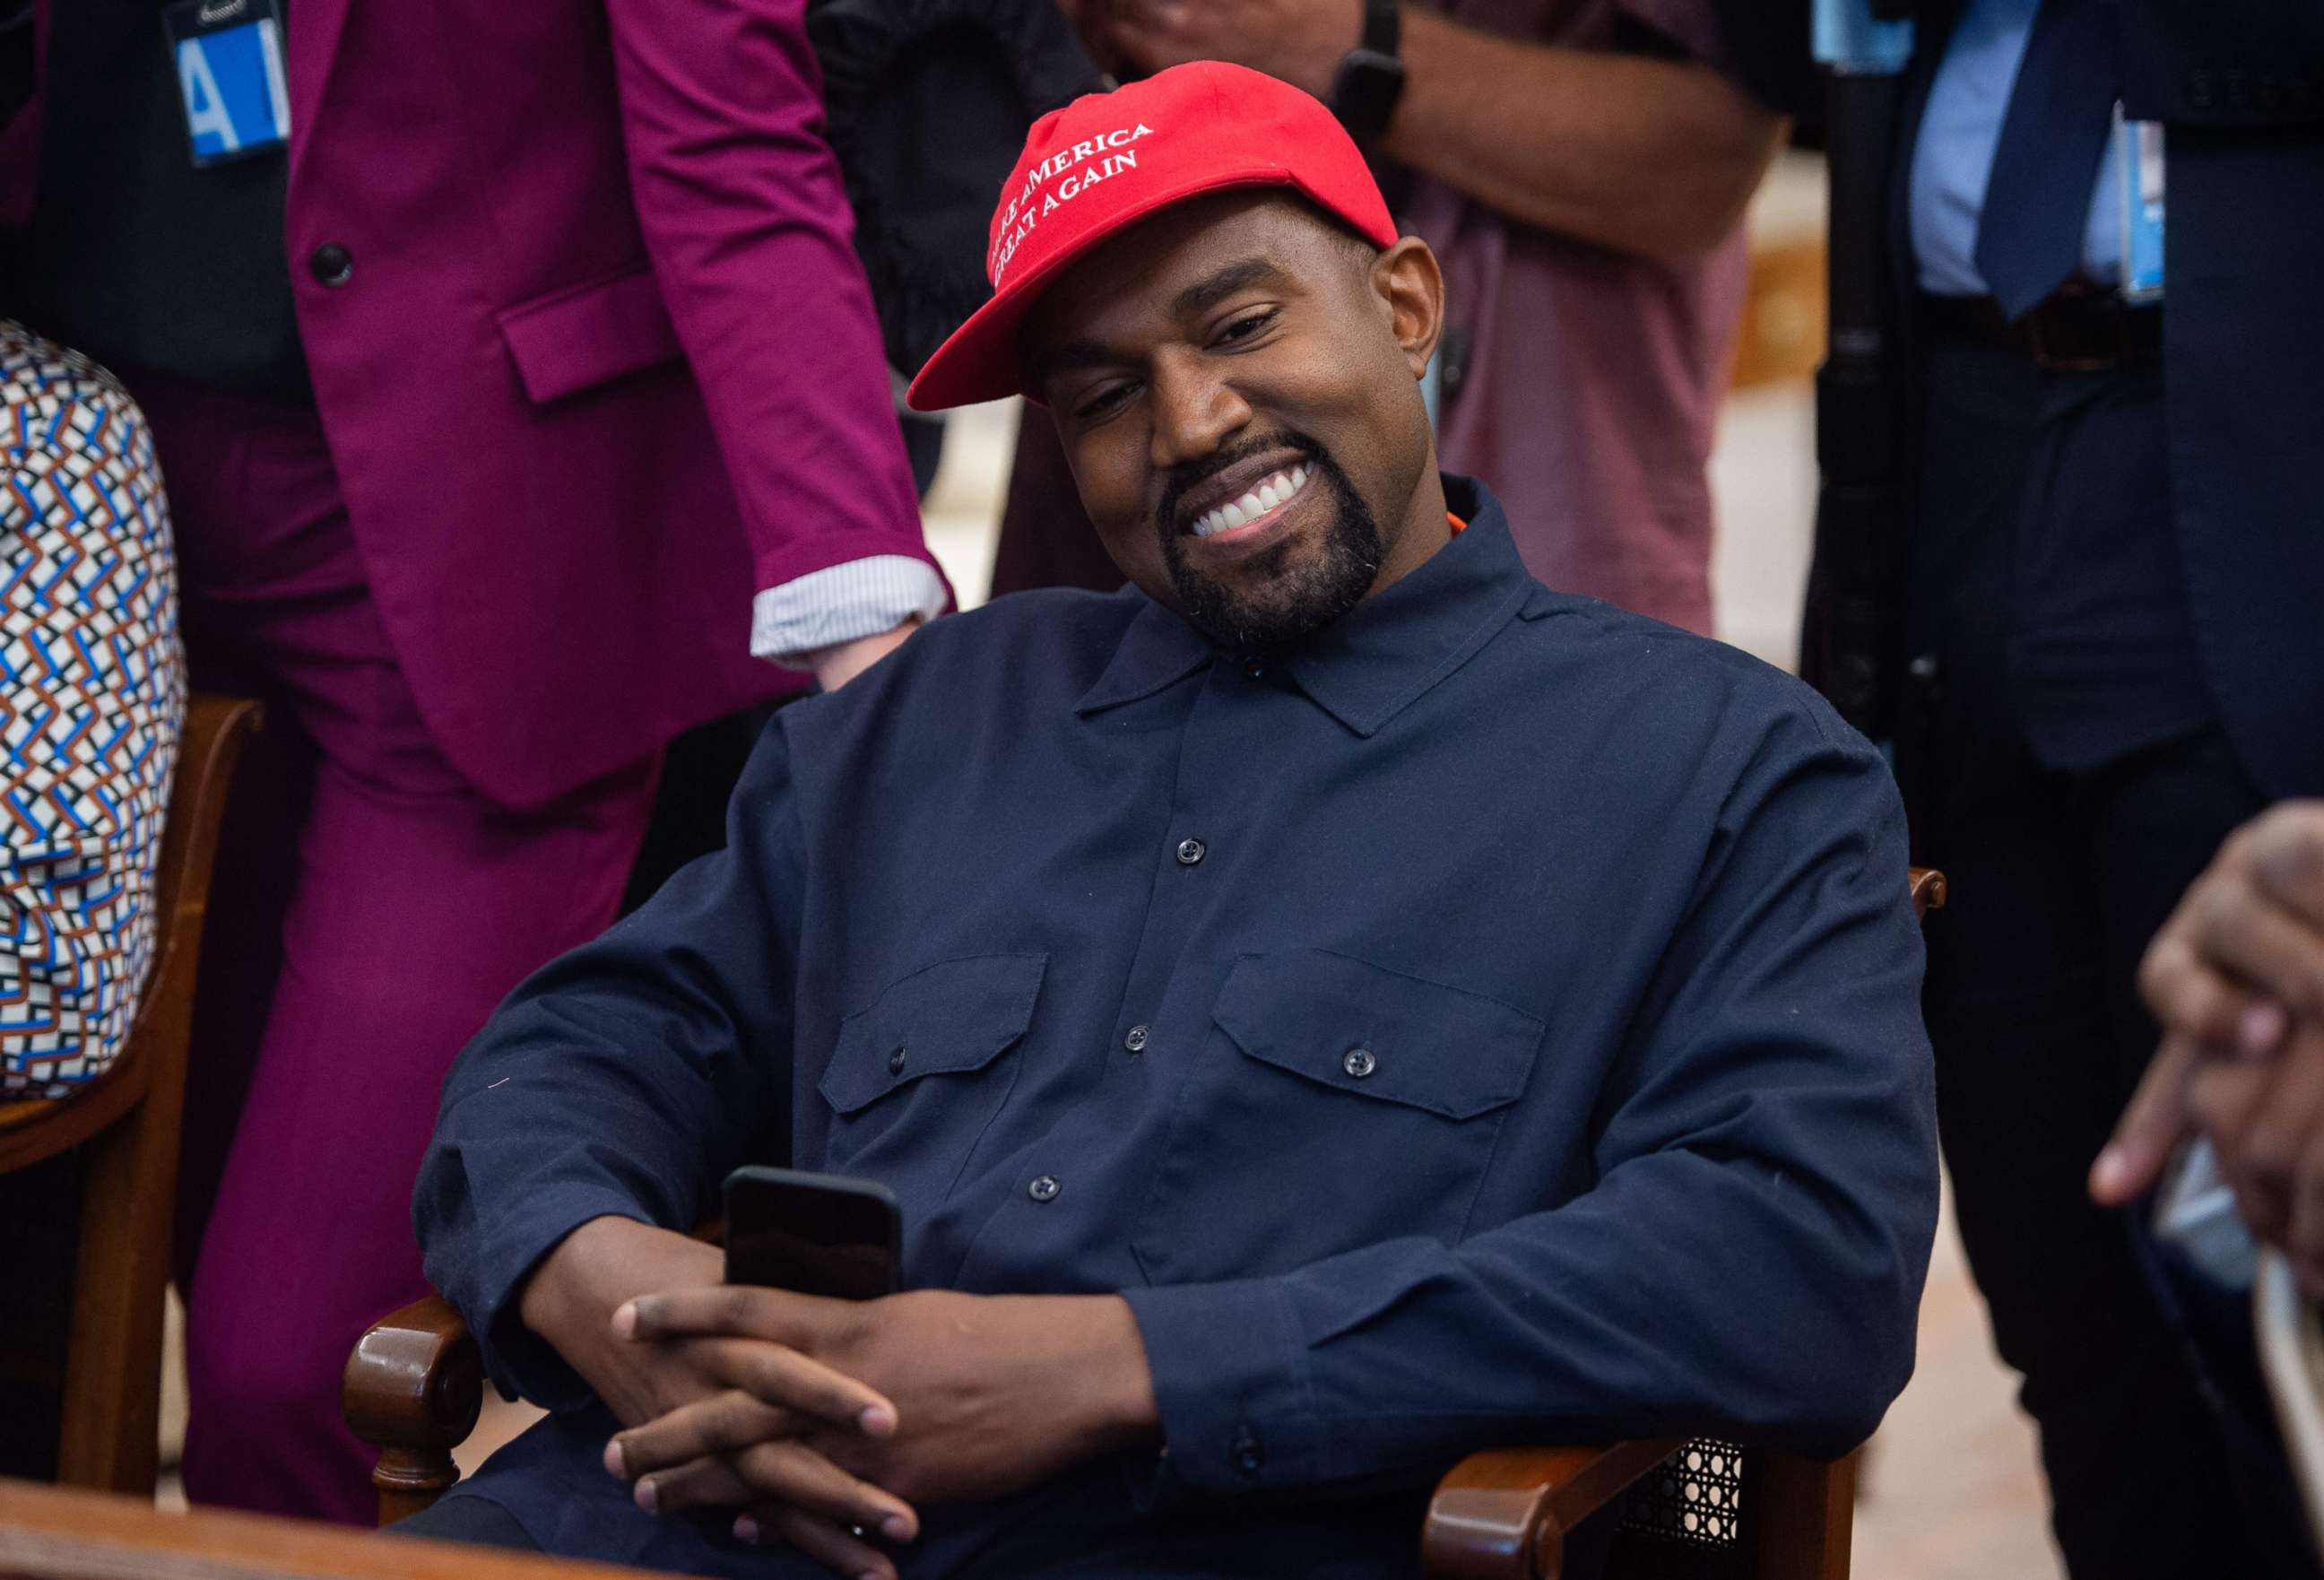 PHOTO:In this file photo, rapper Kanye West speaks during his meeting with President Donald Trump in the Oval Office of the White House in Washington, D.C., on Oct. 11, 2018.